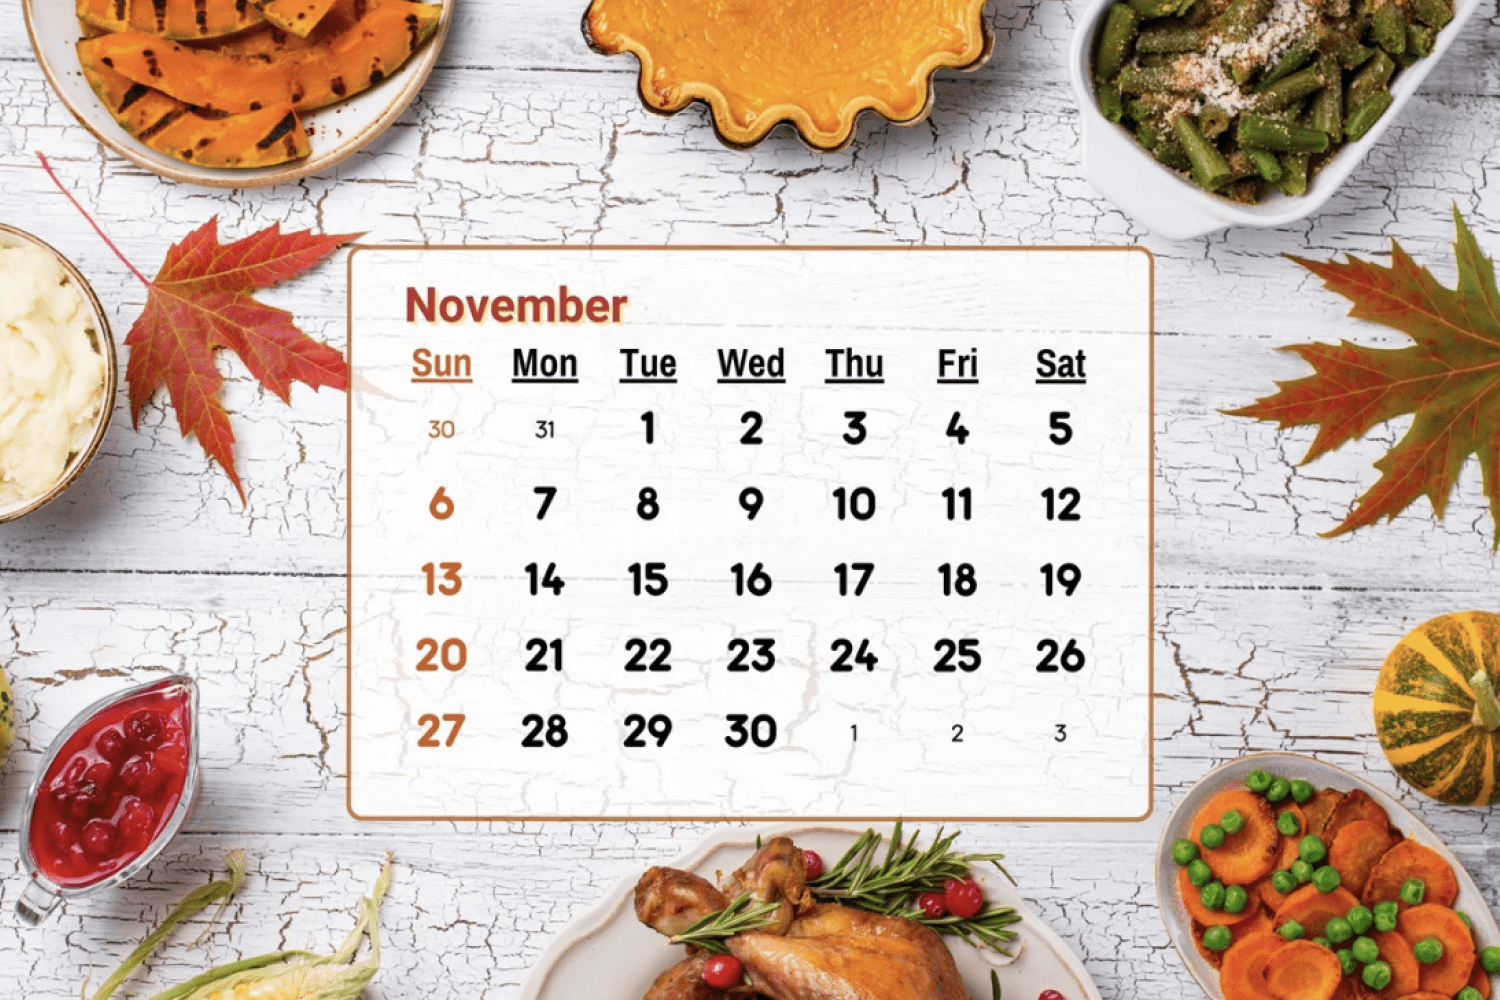 Calendar for november on the background of the table with salads and roasted turkey.